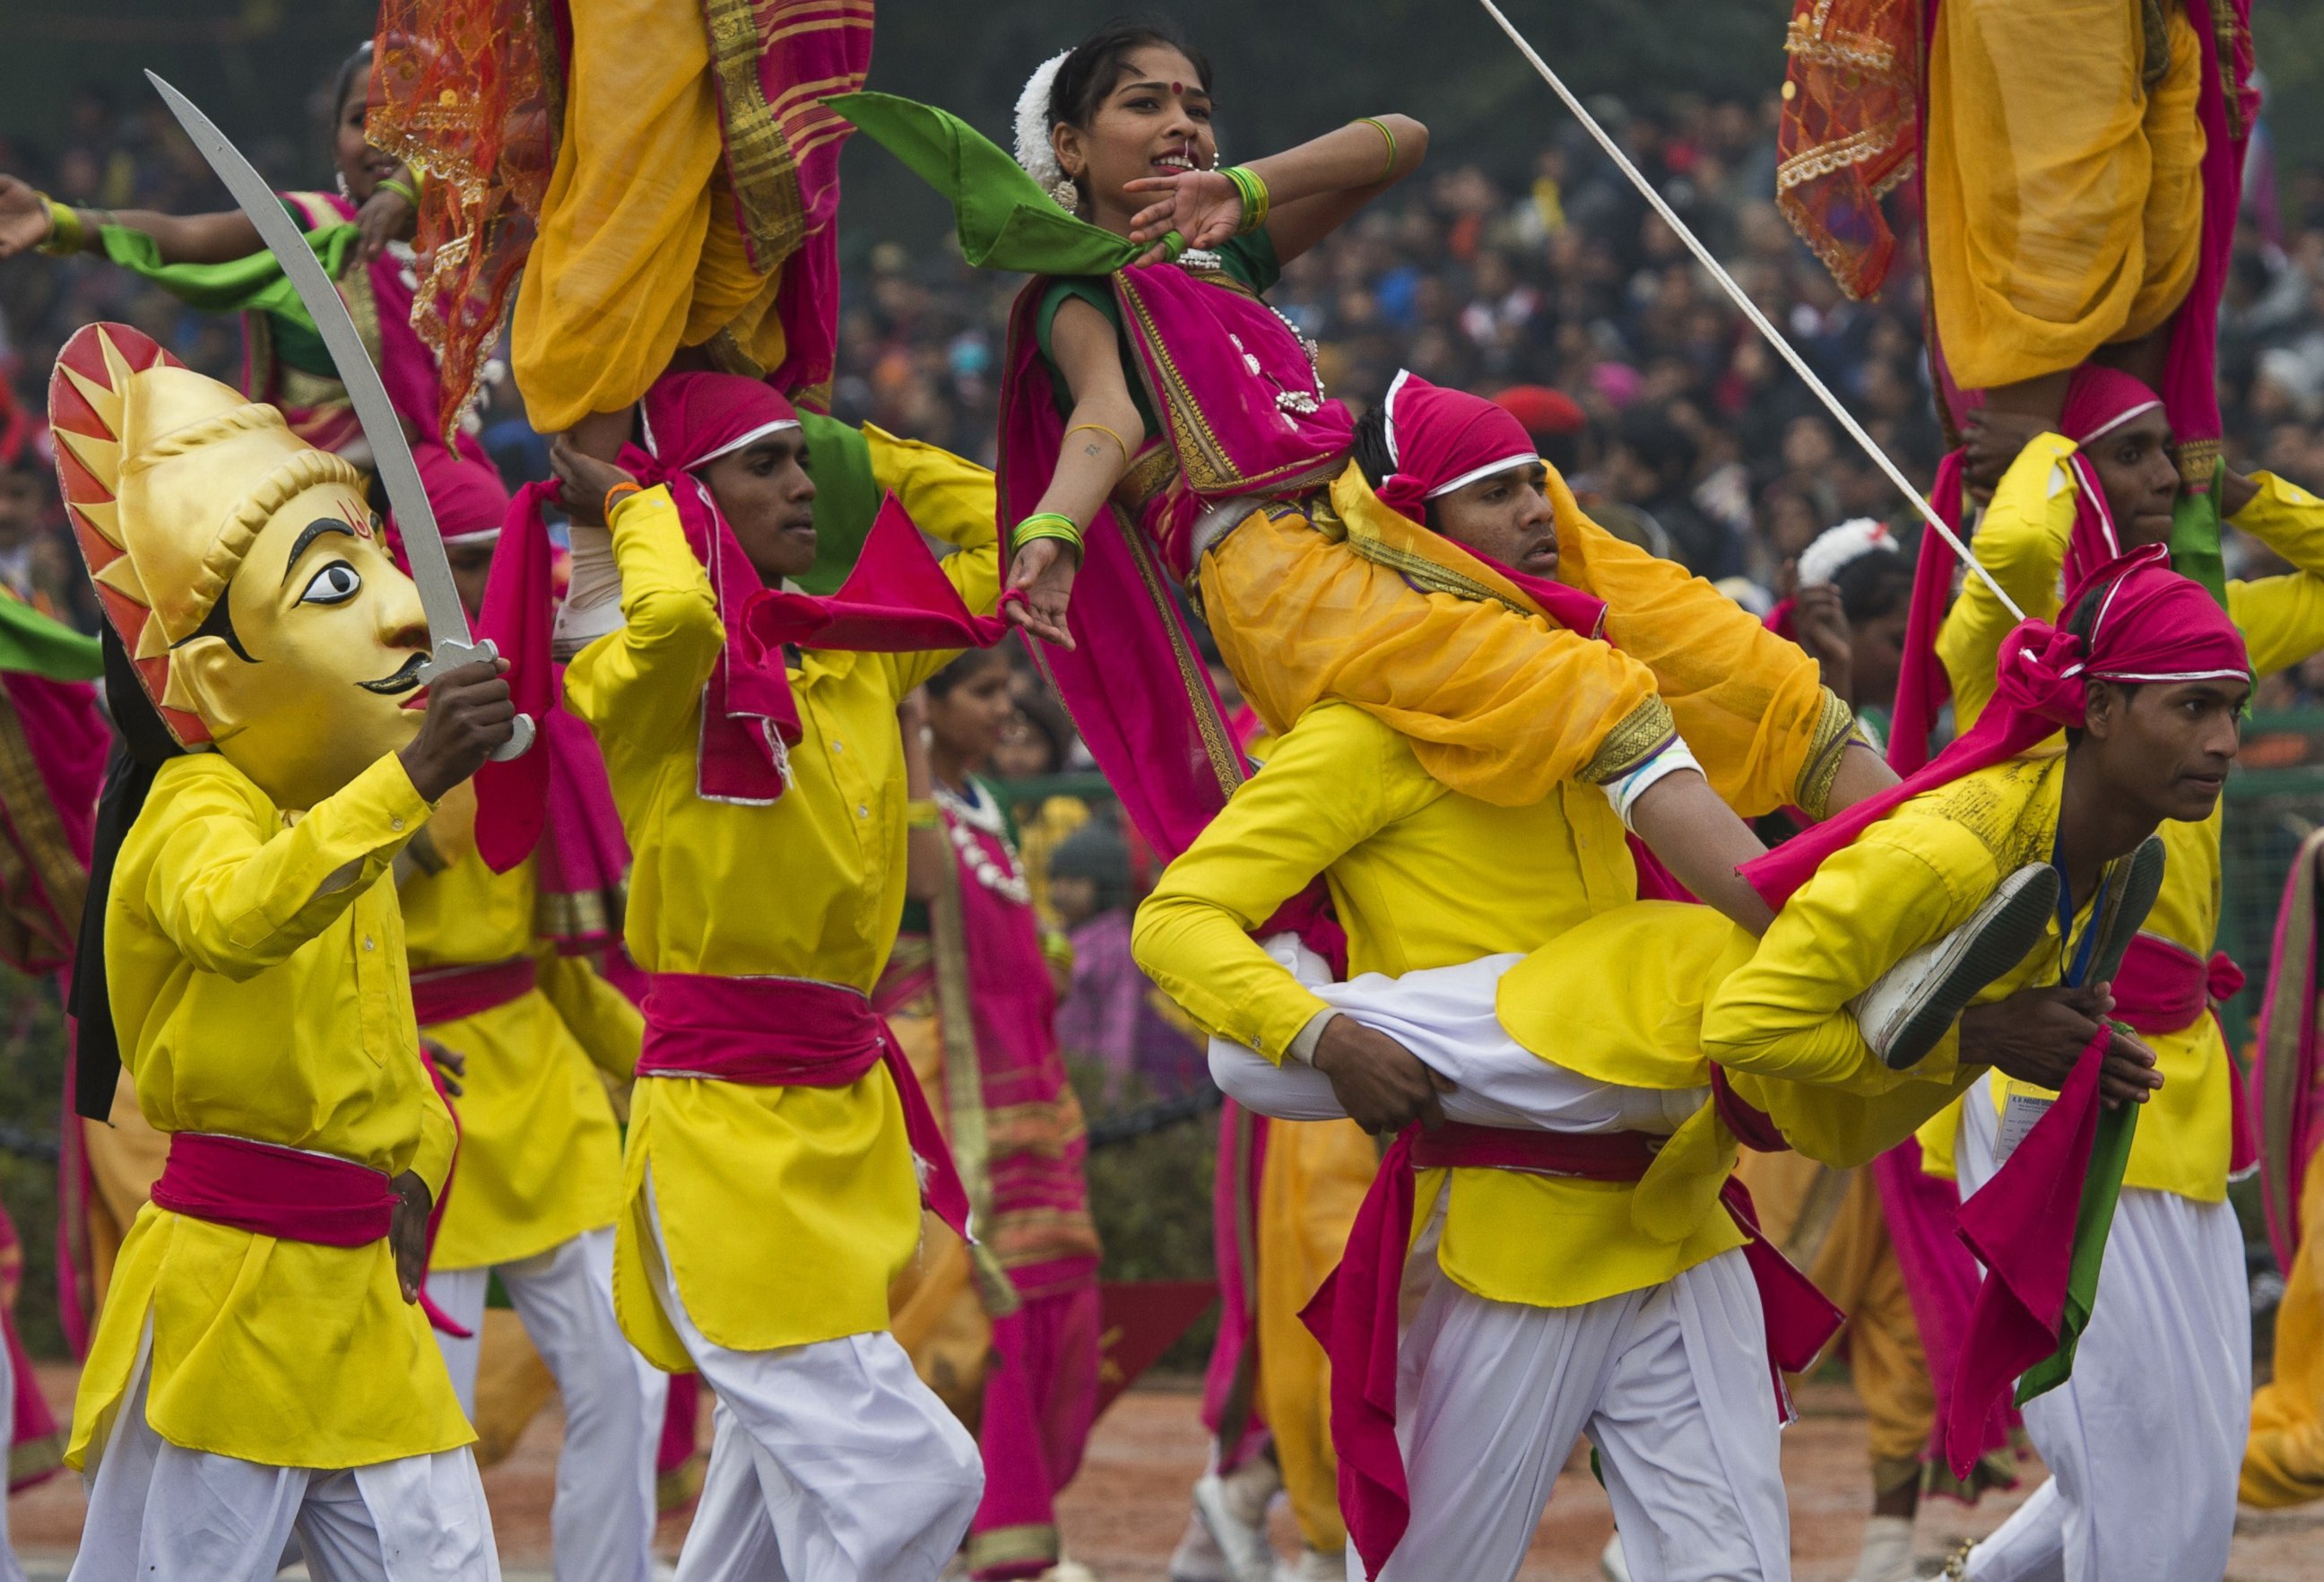 PHOTO: Indian dancers perform during the nation's Republic Day Parade in New Delhi on January 26, 2015.